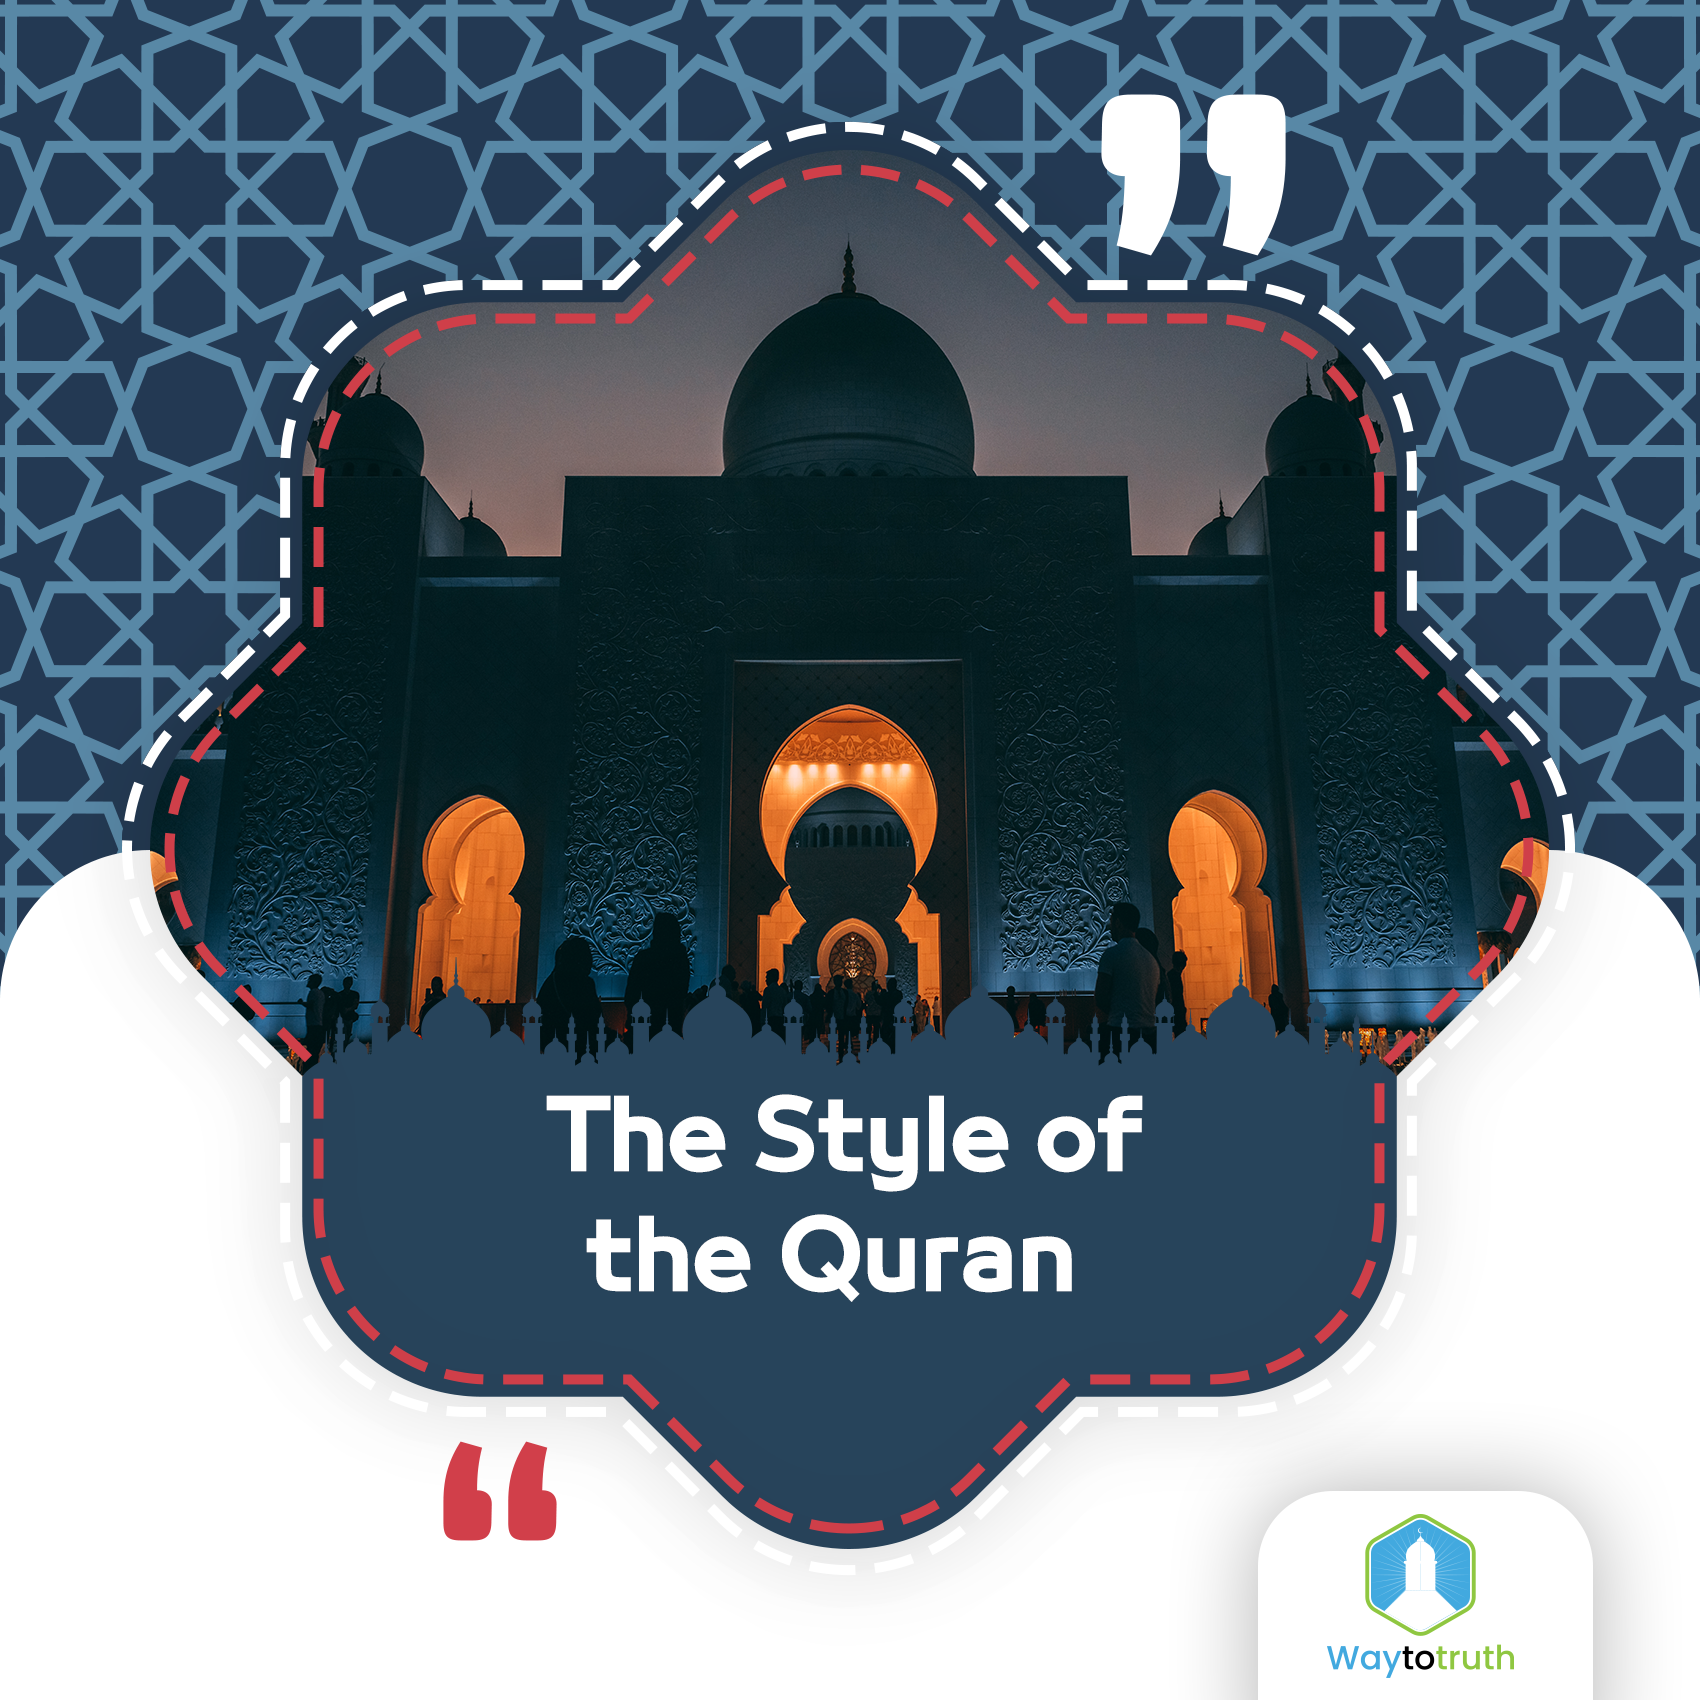 The Style of the Quran